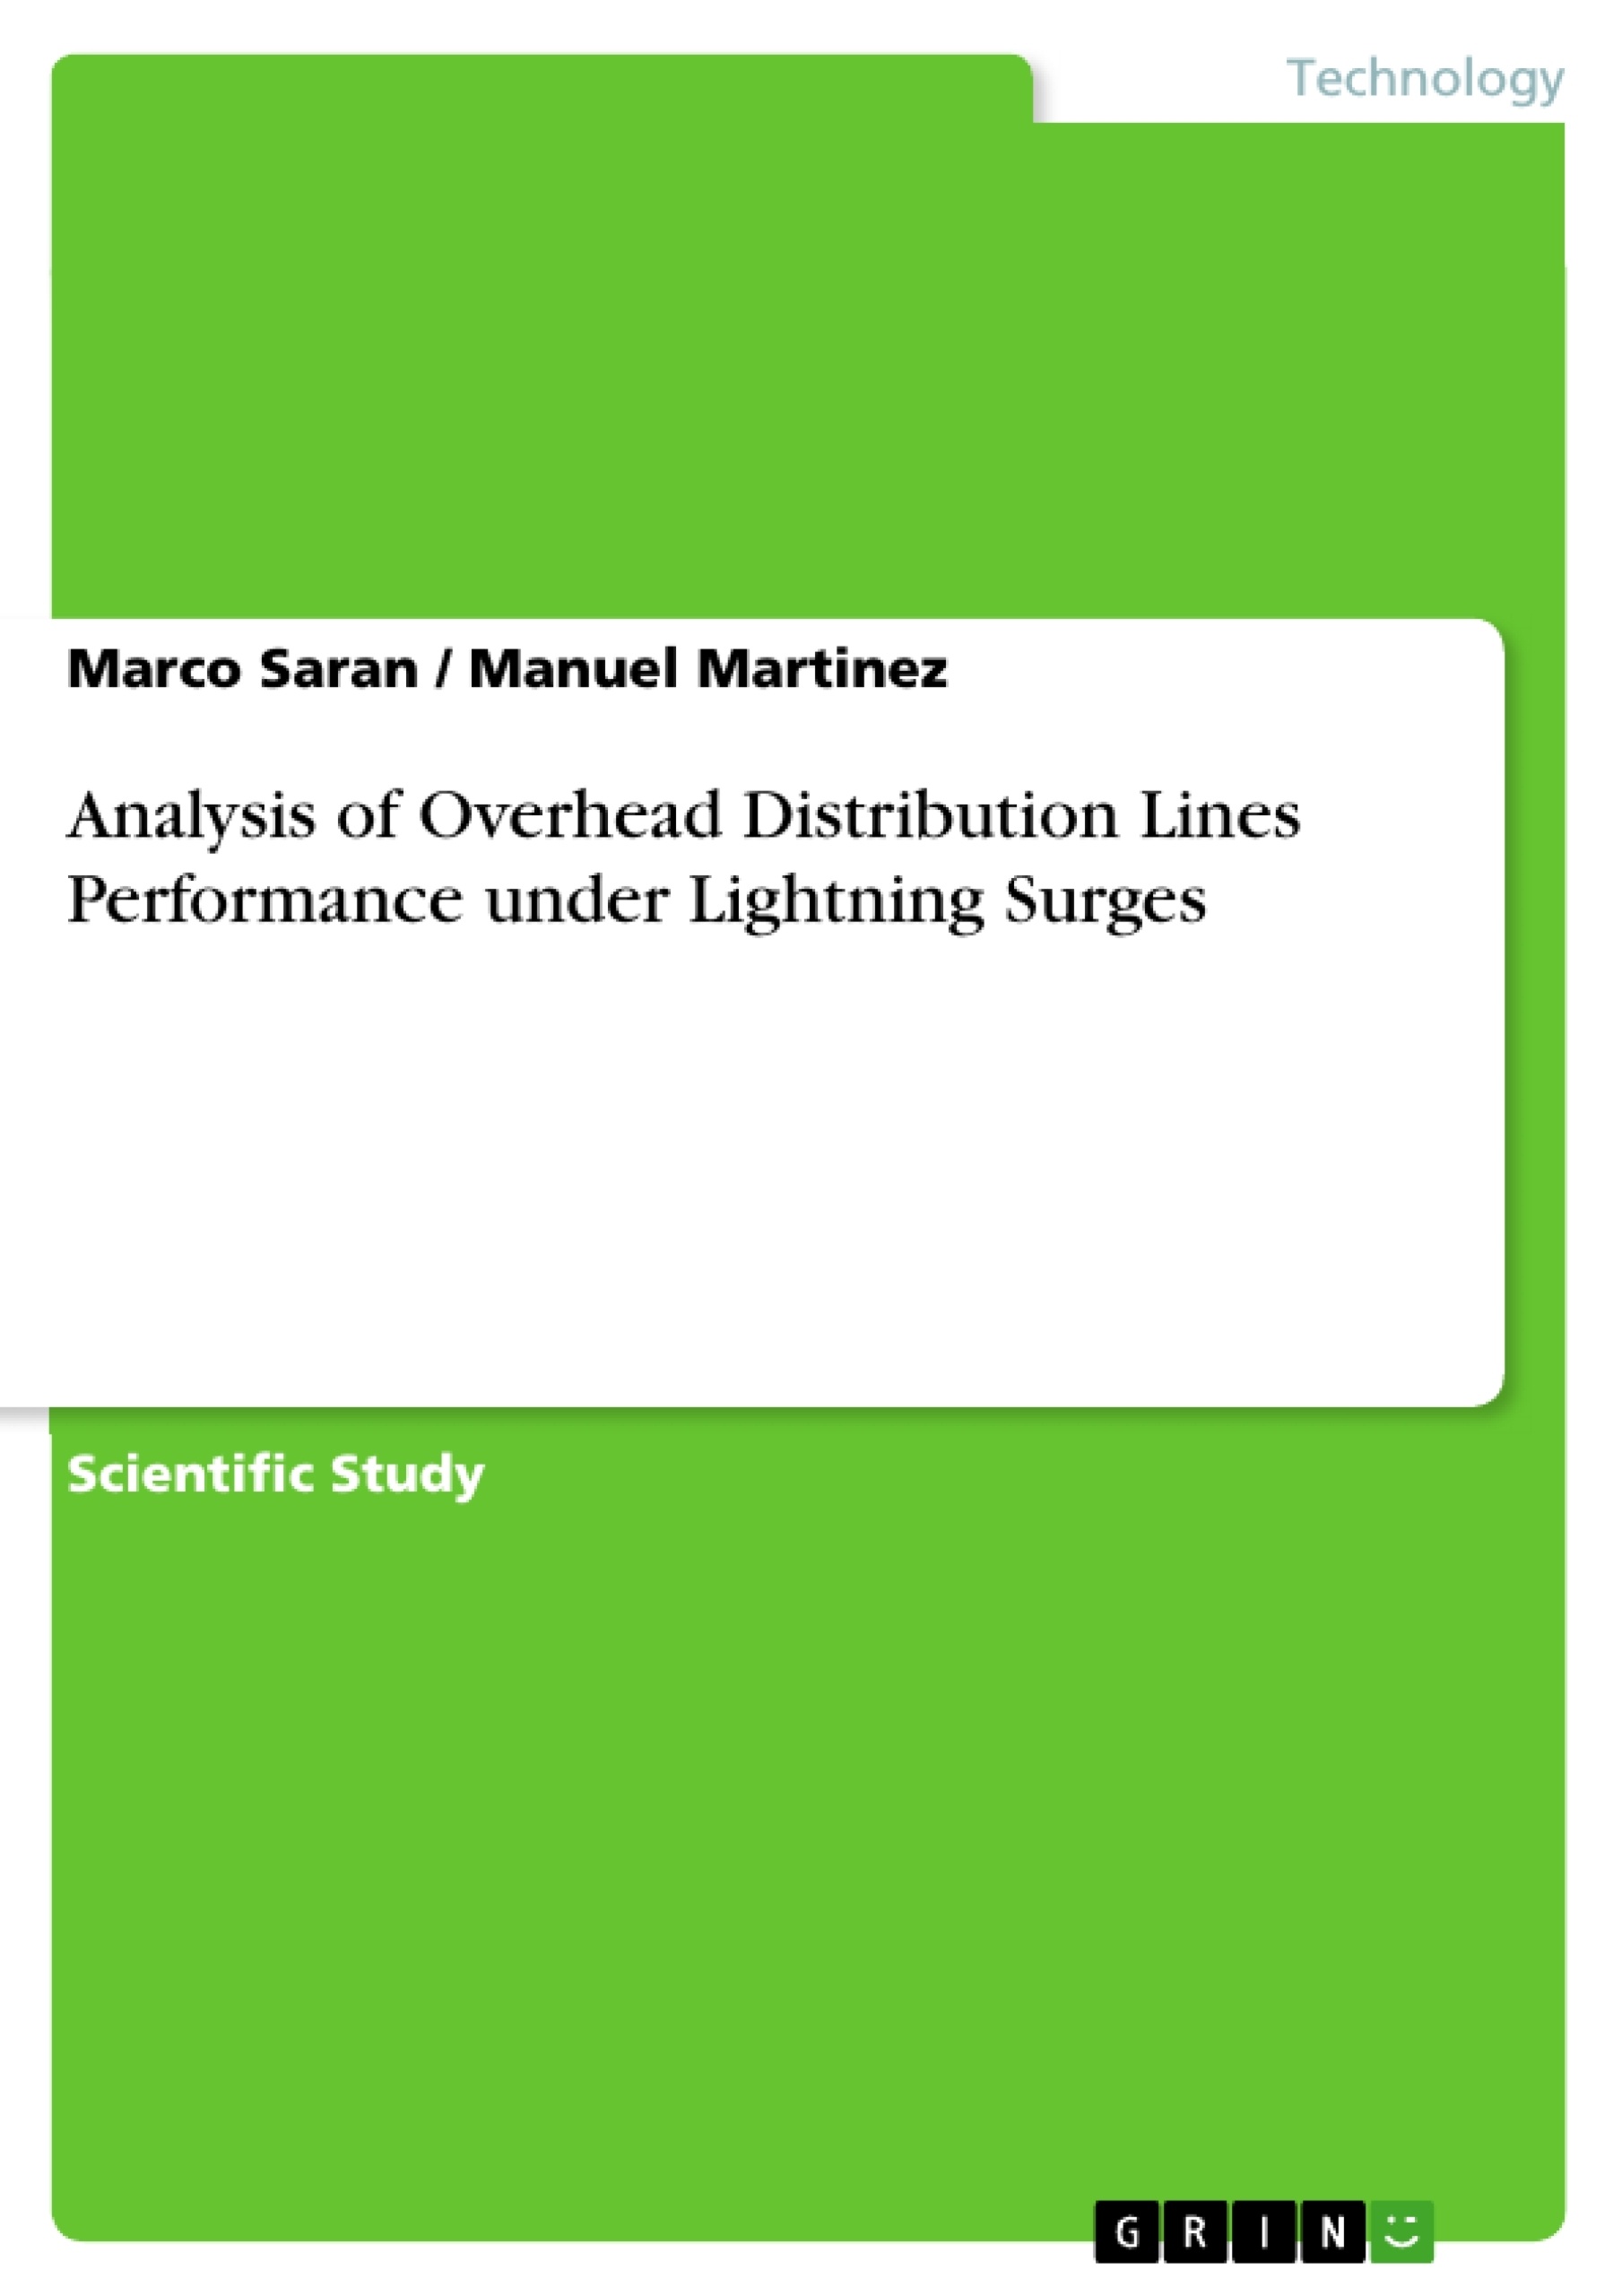 Título: Analysis of Overhead Distribution Lines Performance under Lightning Surges